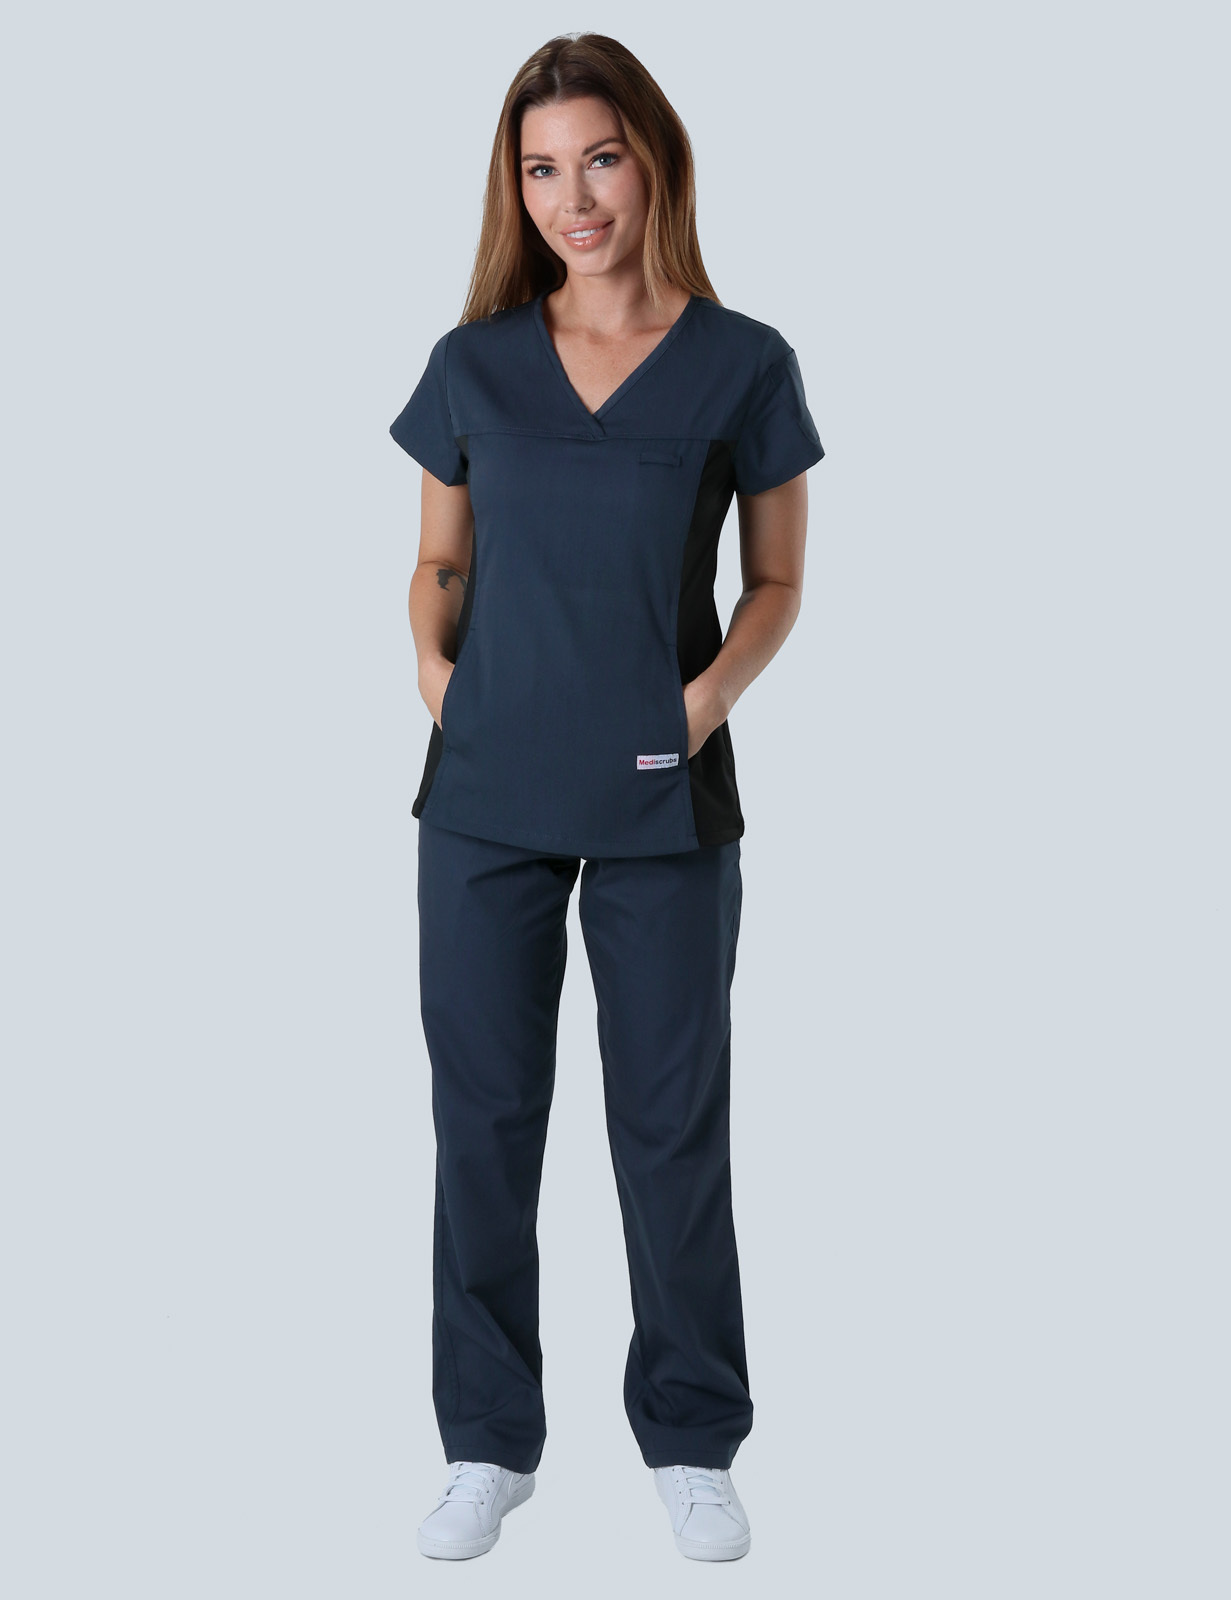 Women's Fit Solid Scrub Top With Spandex Panel - Navy - Large